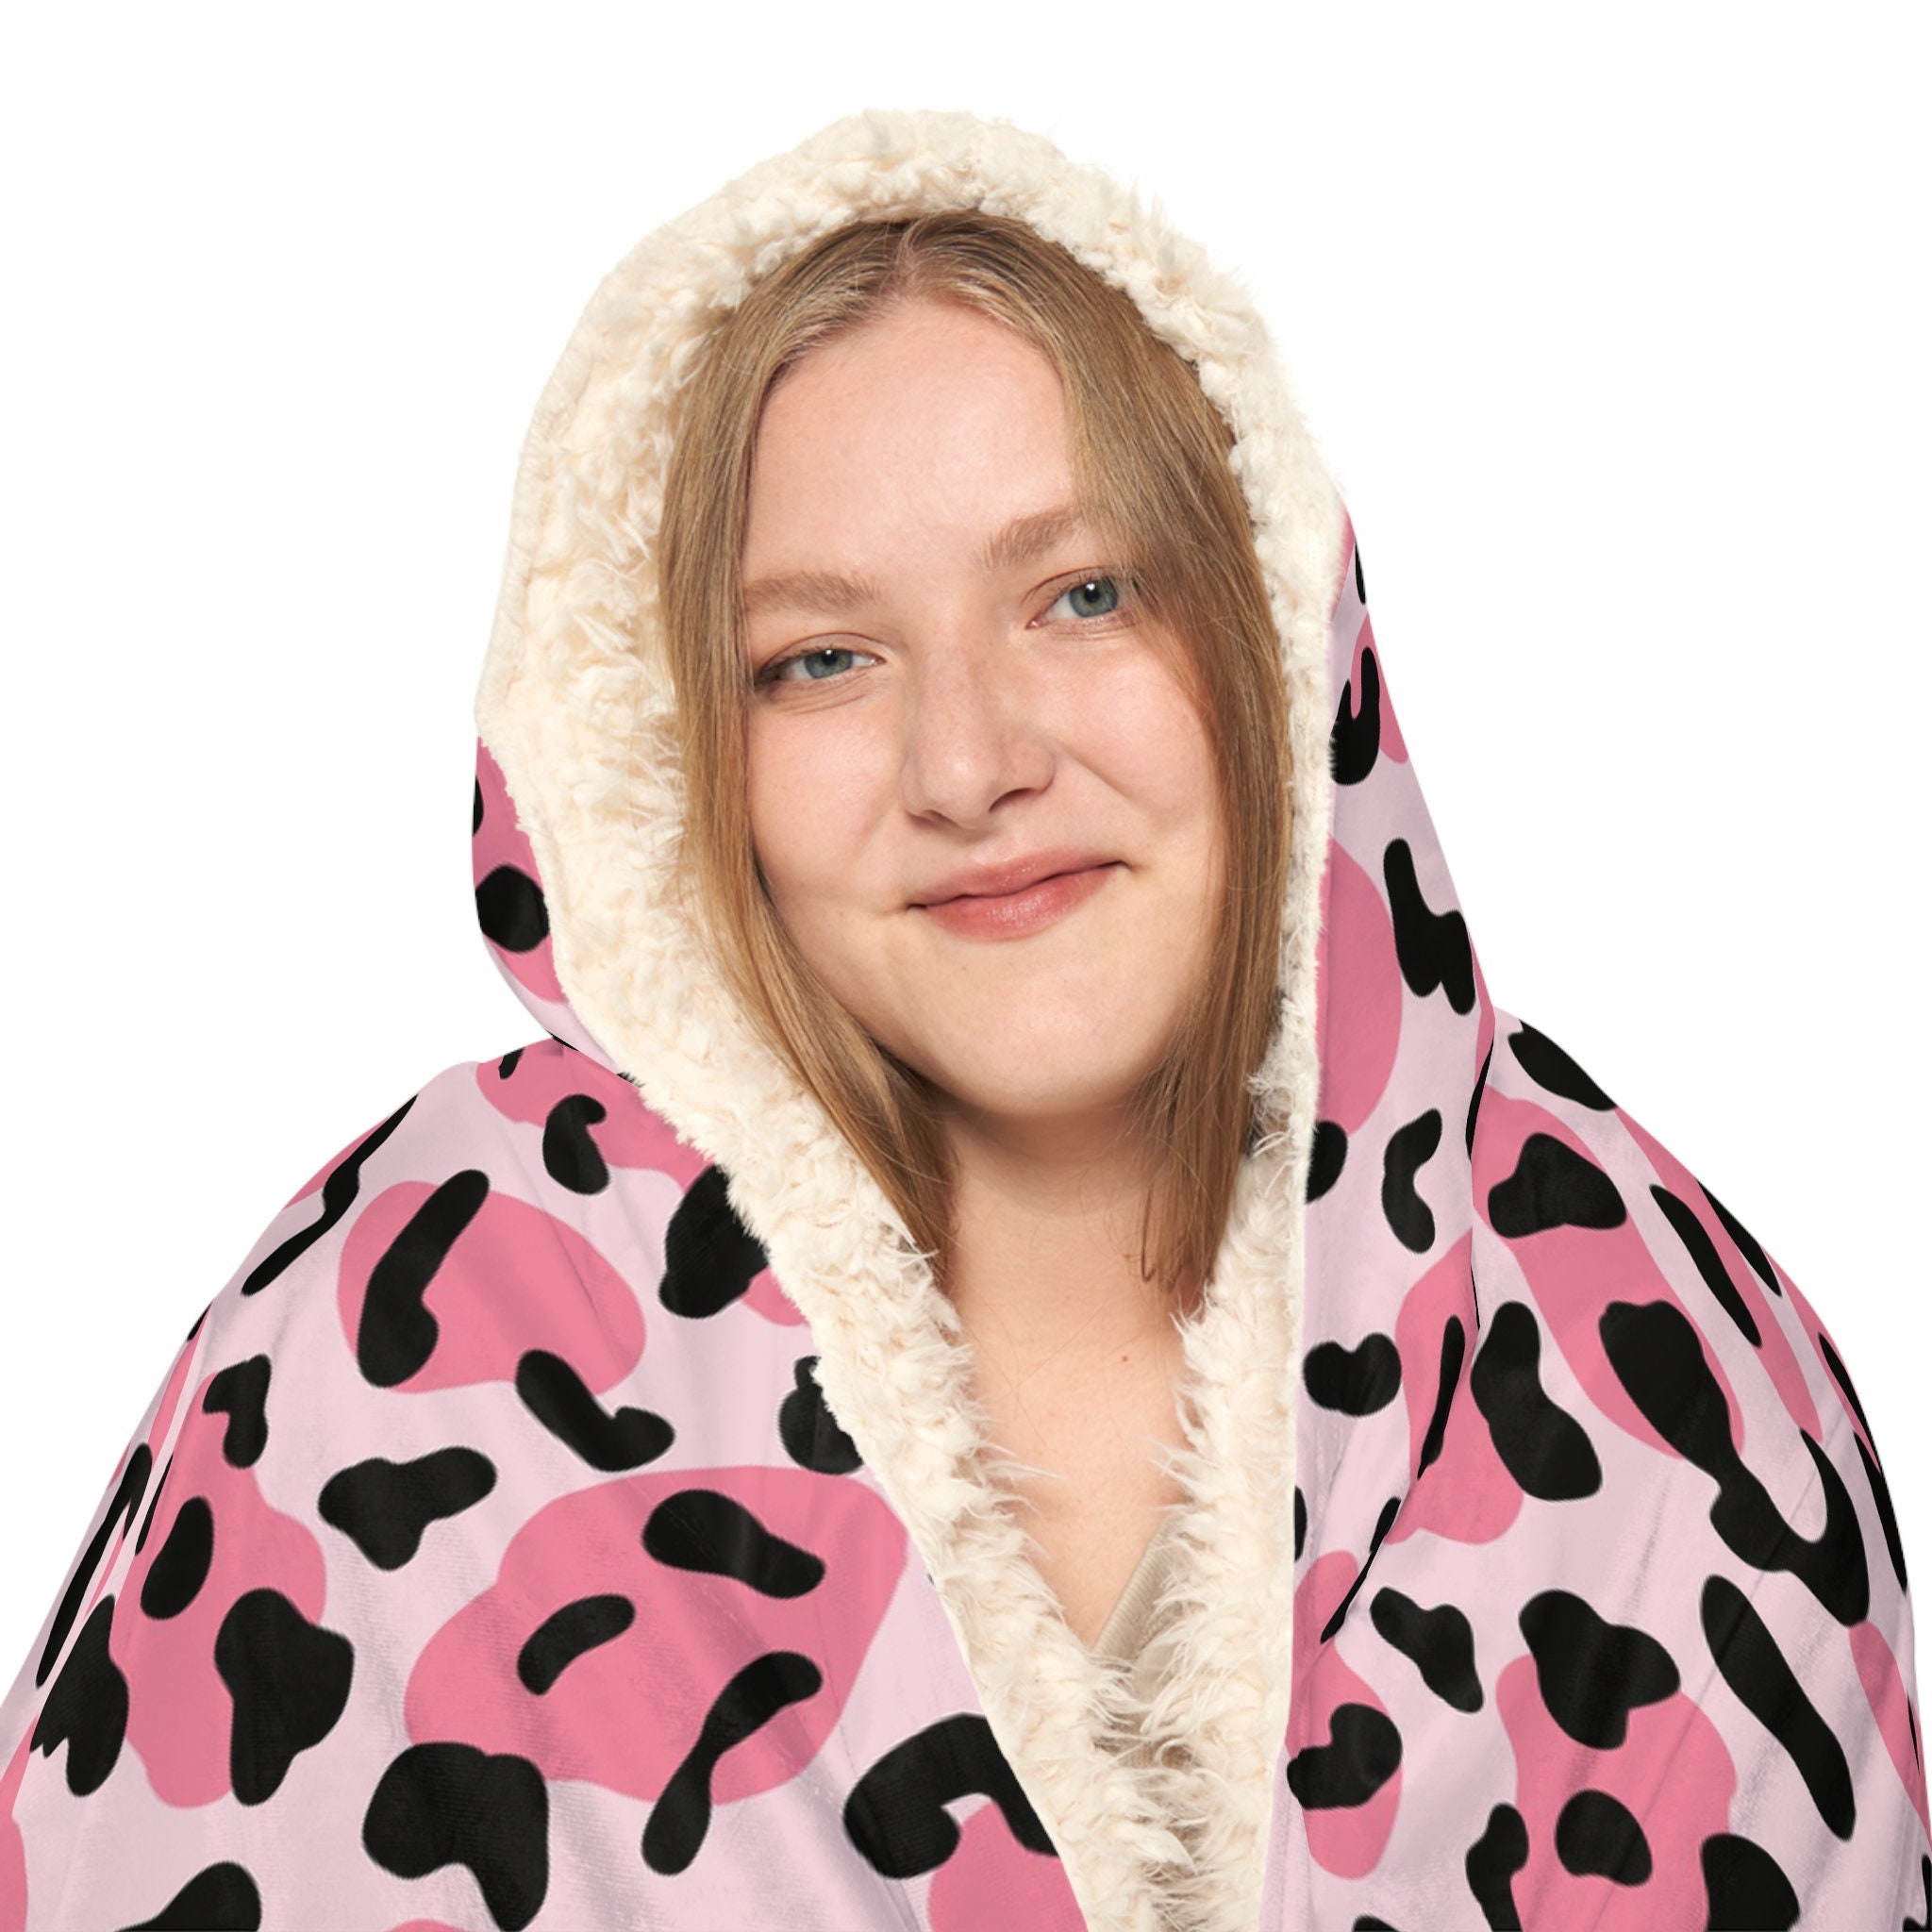 Discover Pink/Black Leopard Print Hooded Blanket | Cozy Home Wear